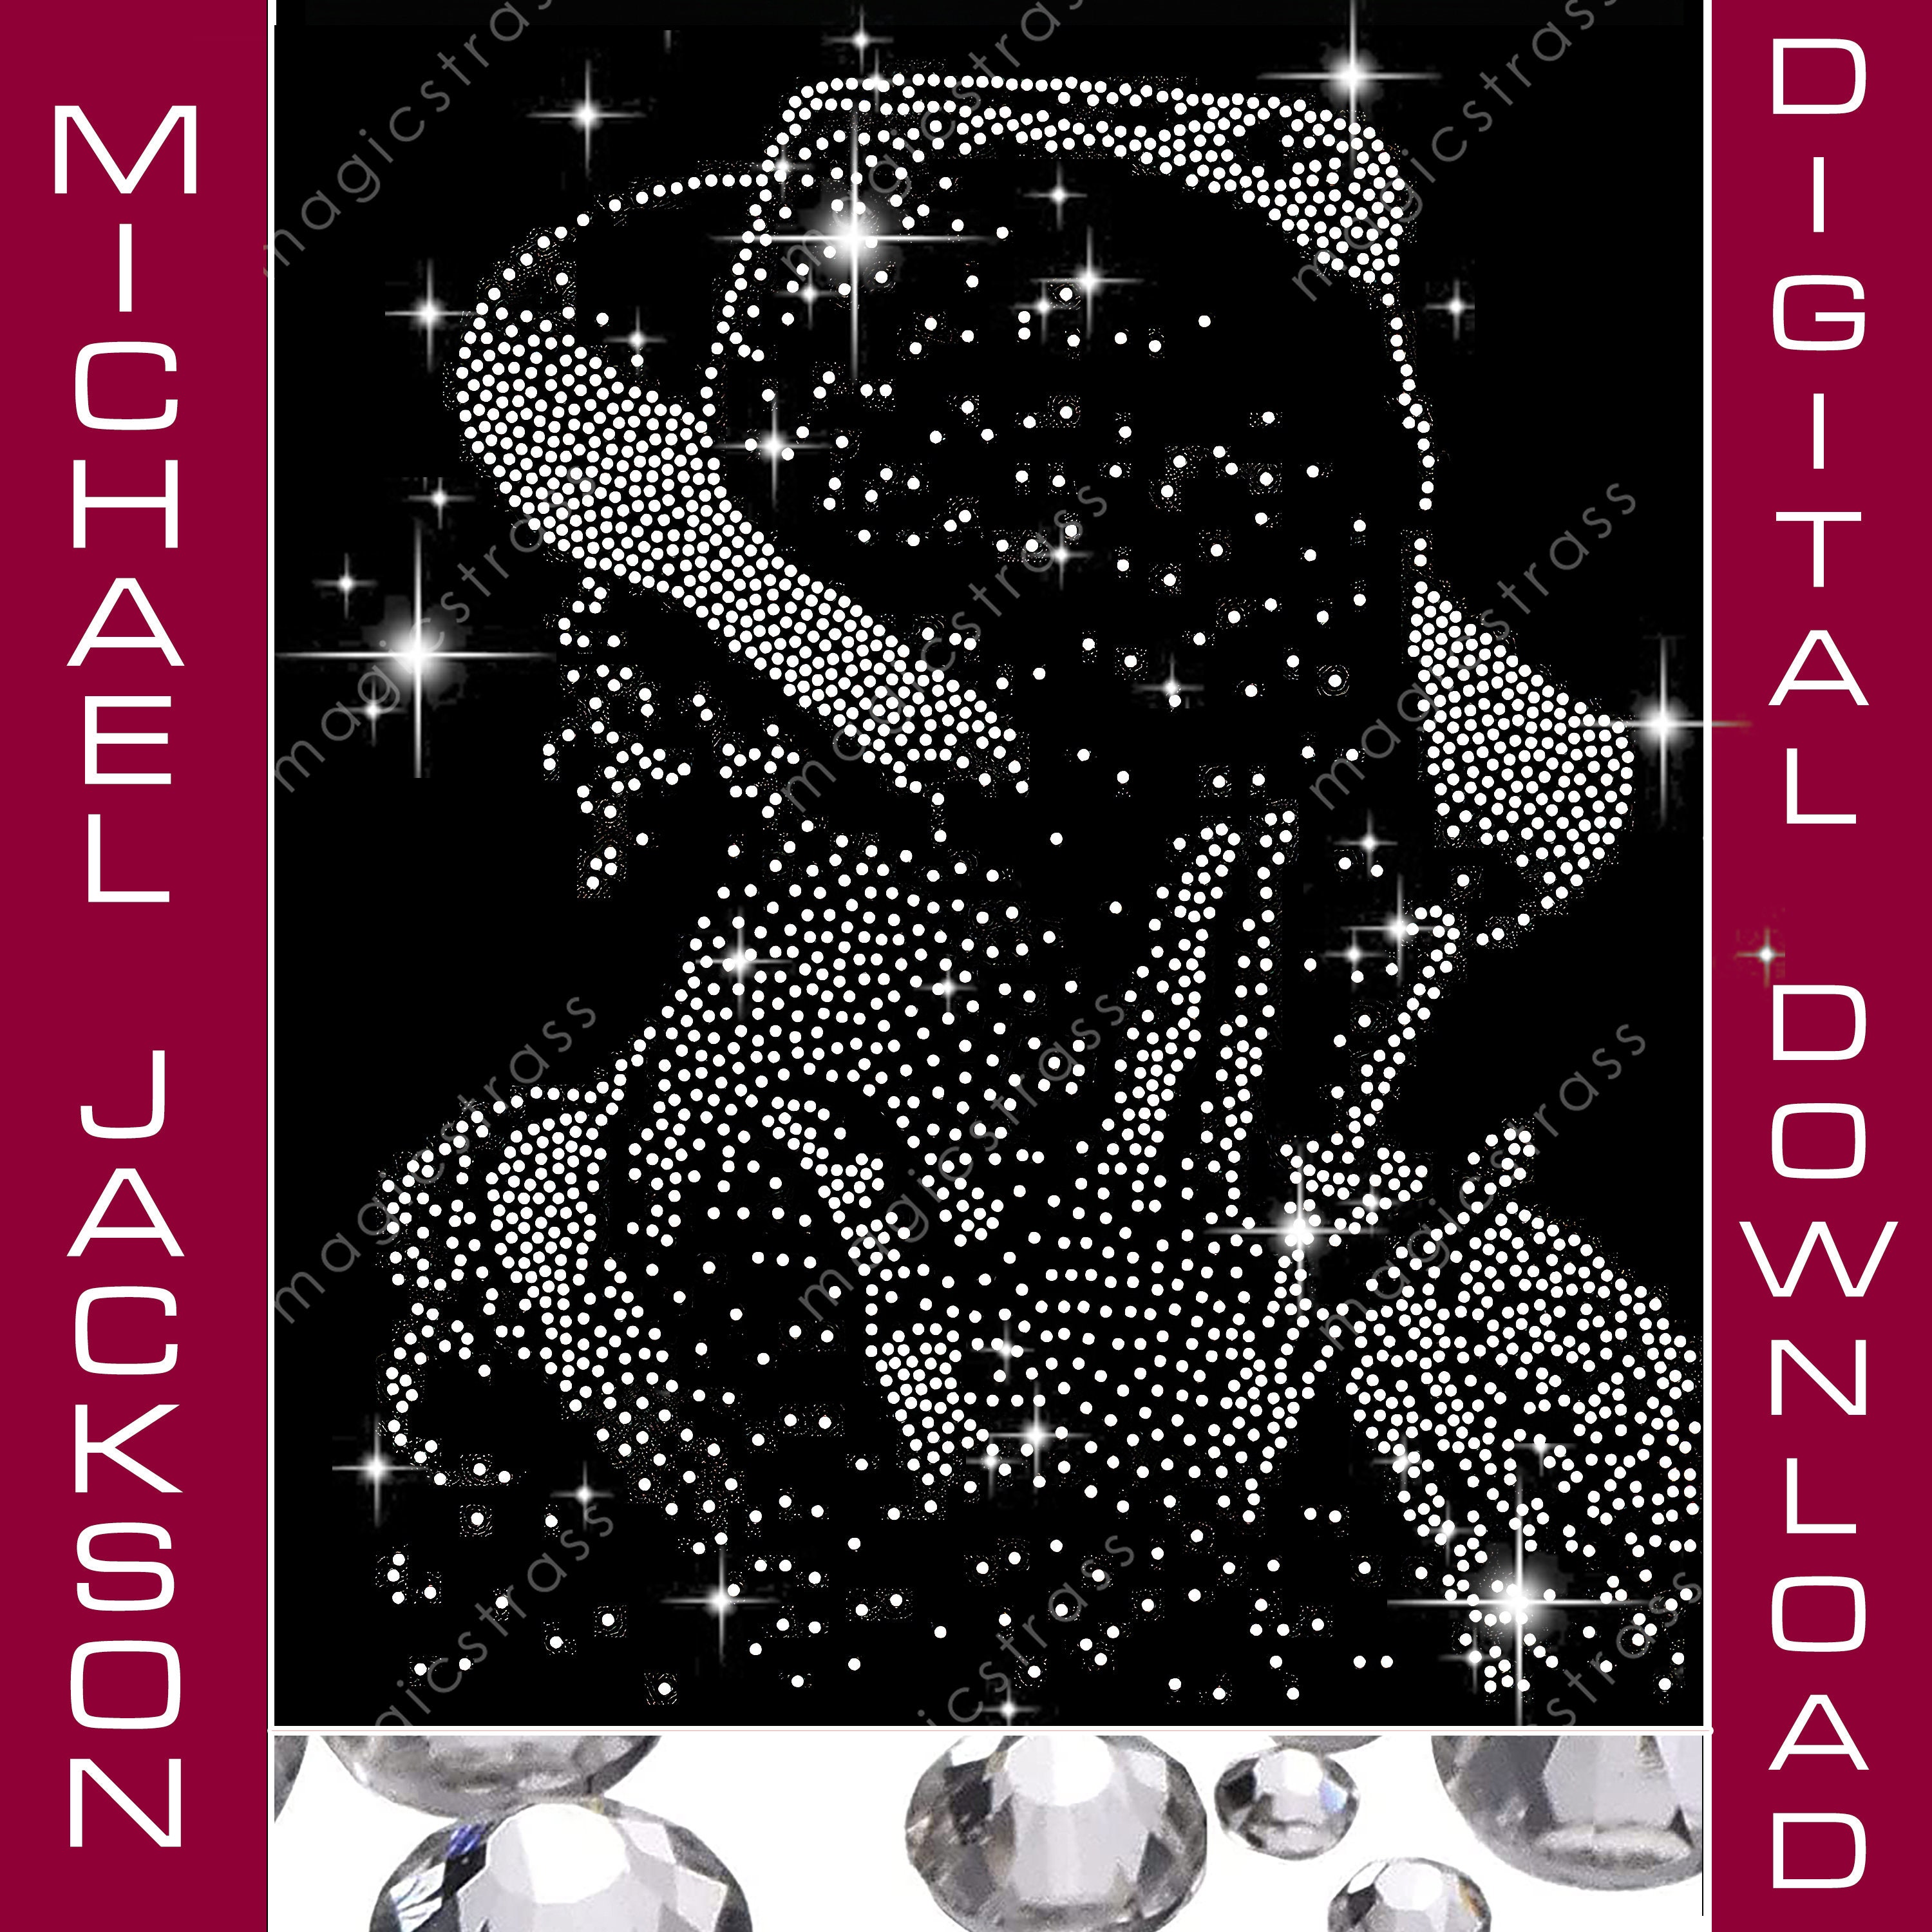 Michael Jackson ~ MUSIC ~ ~You Can Do It 2. www.zazzle.com/Posters